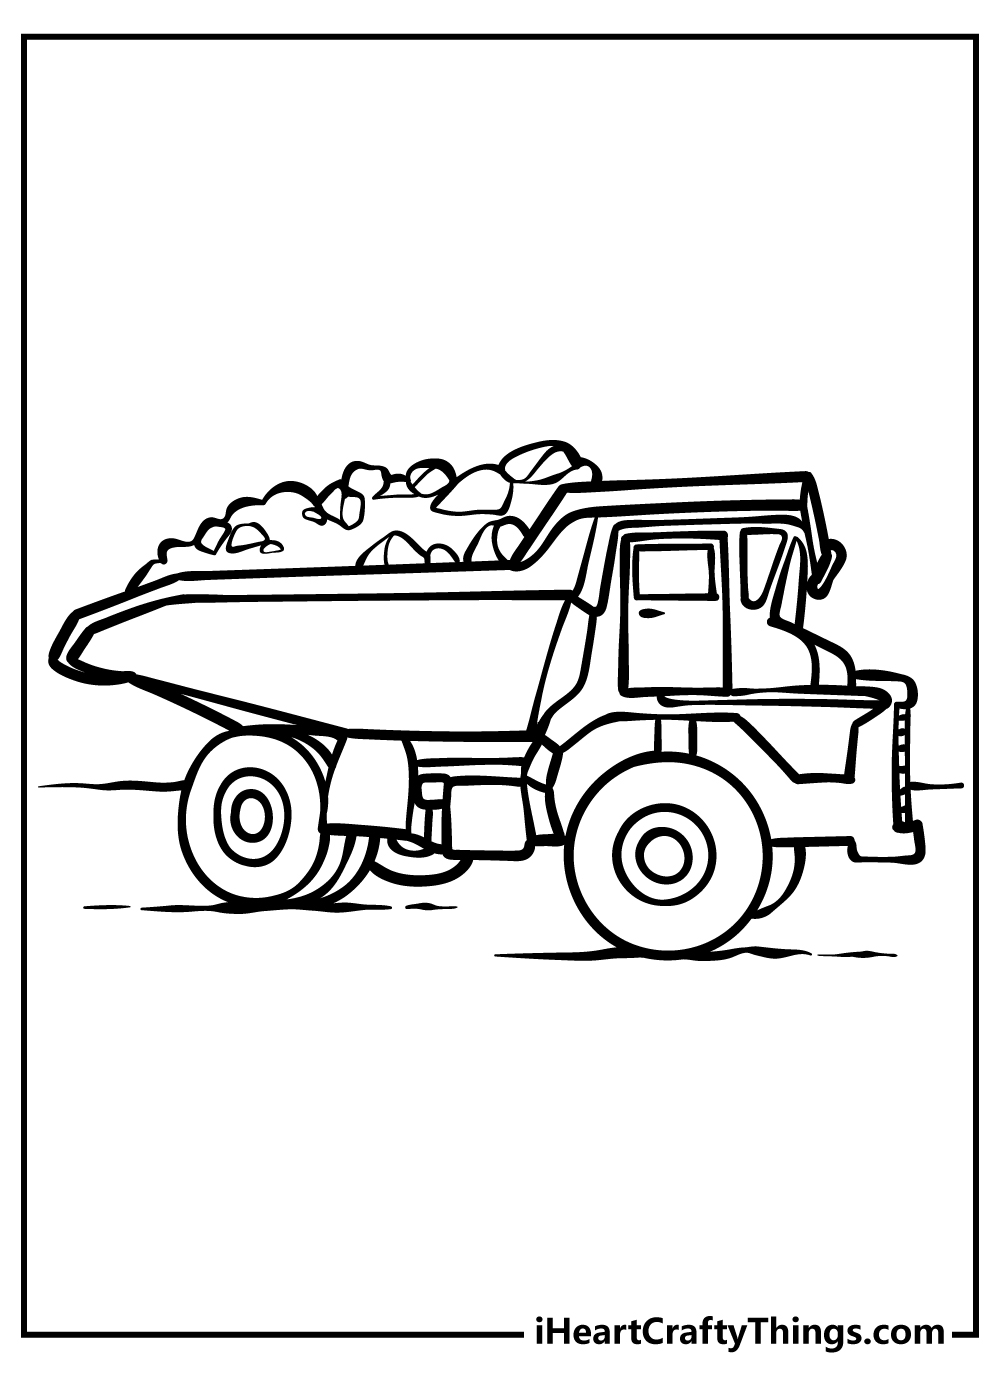 Dump Truck coloring pages free printables